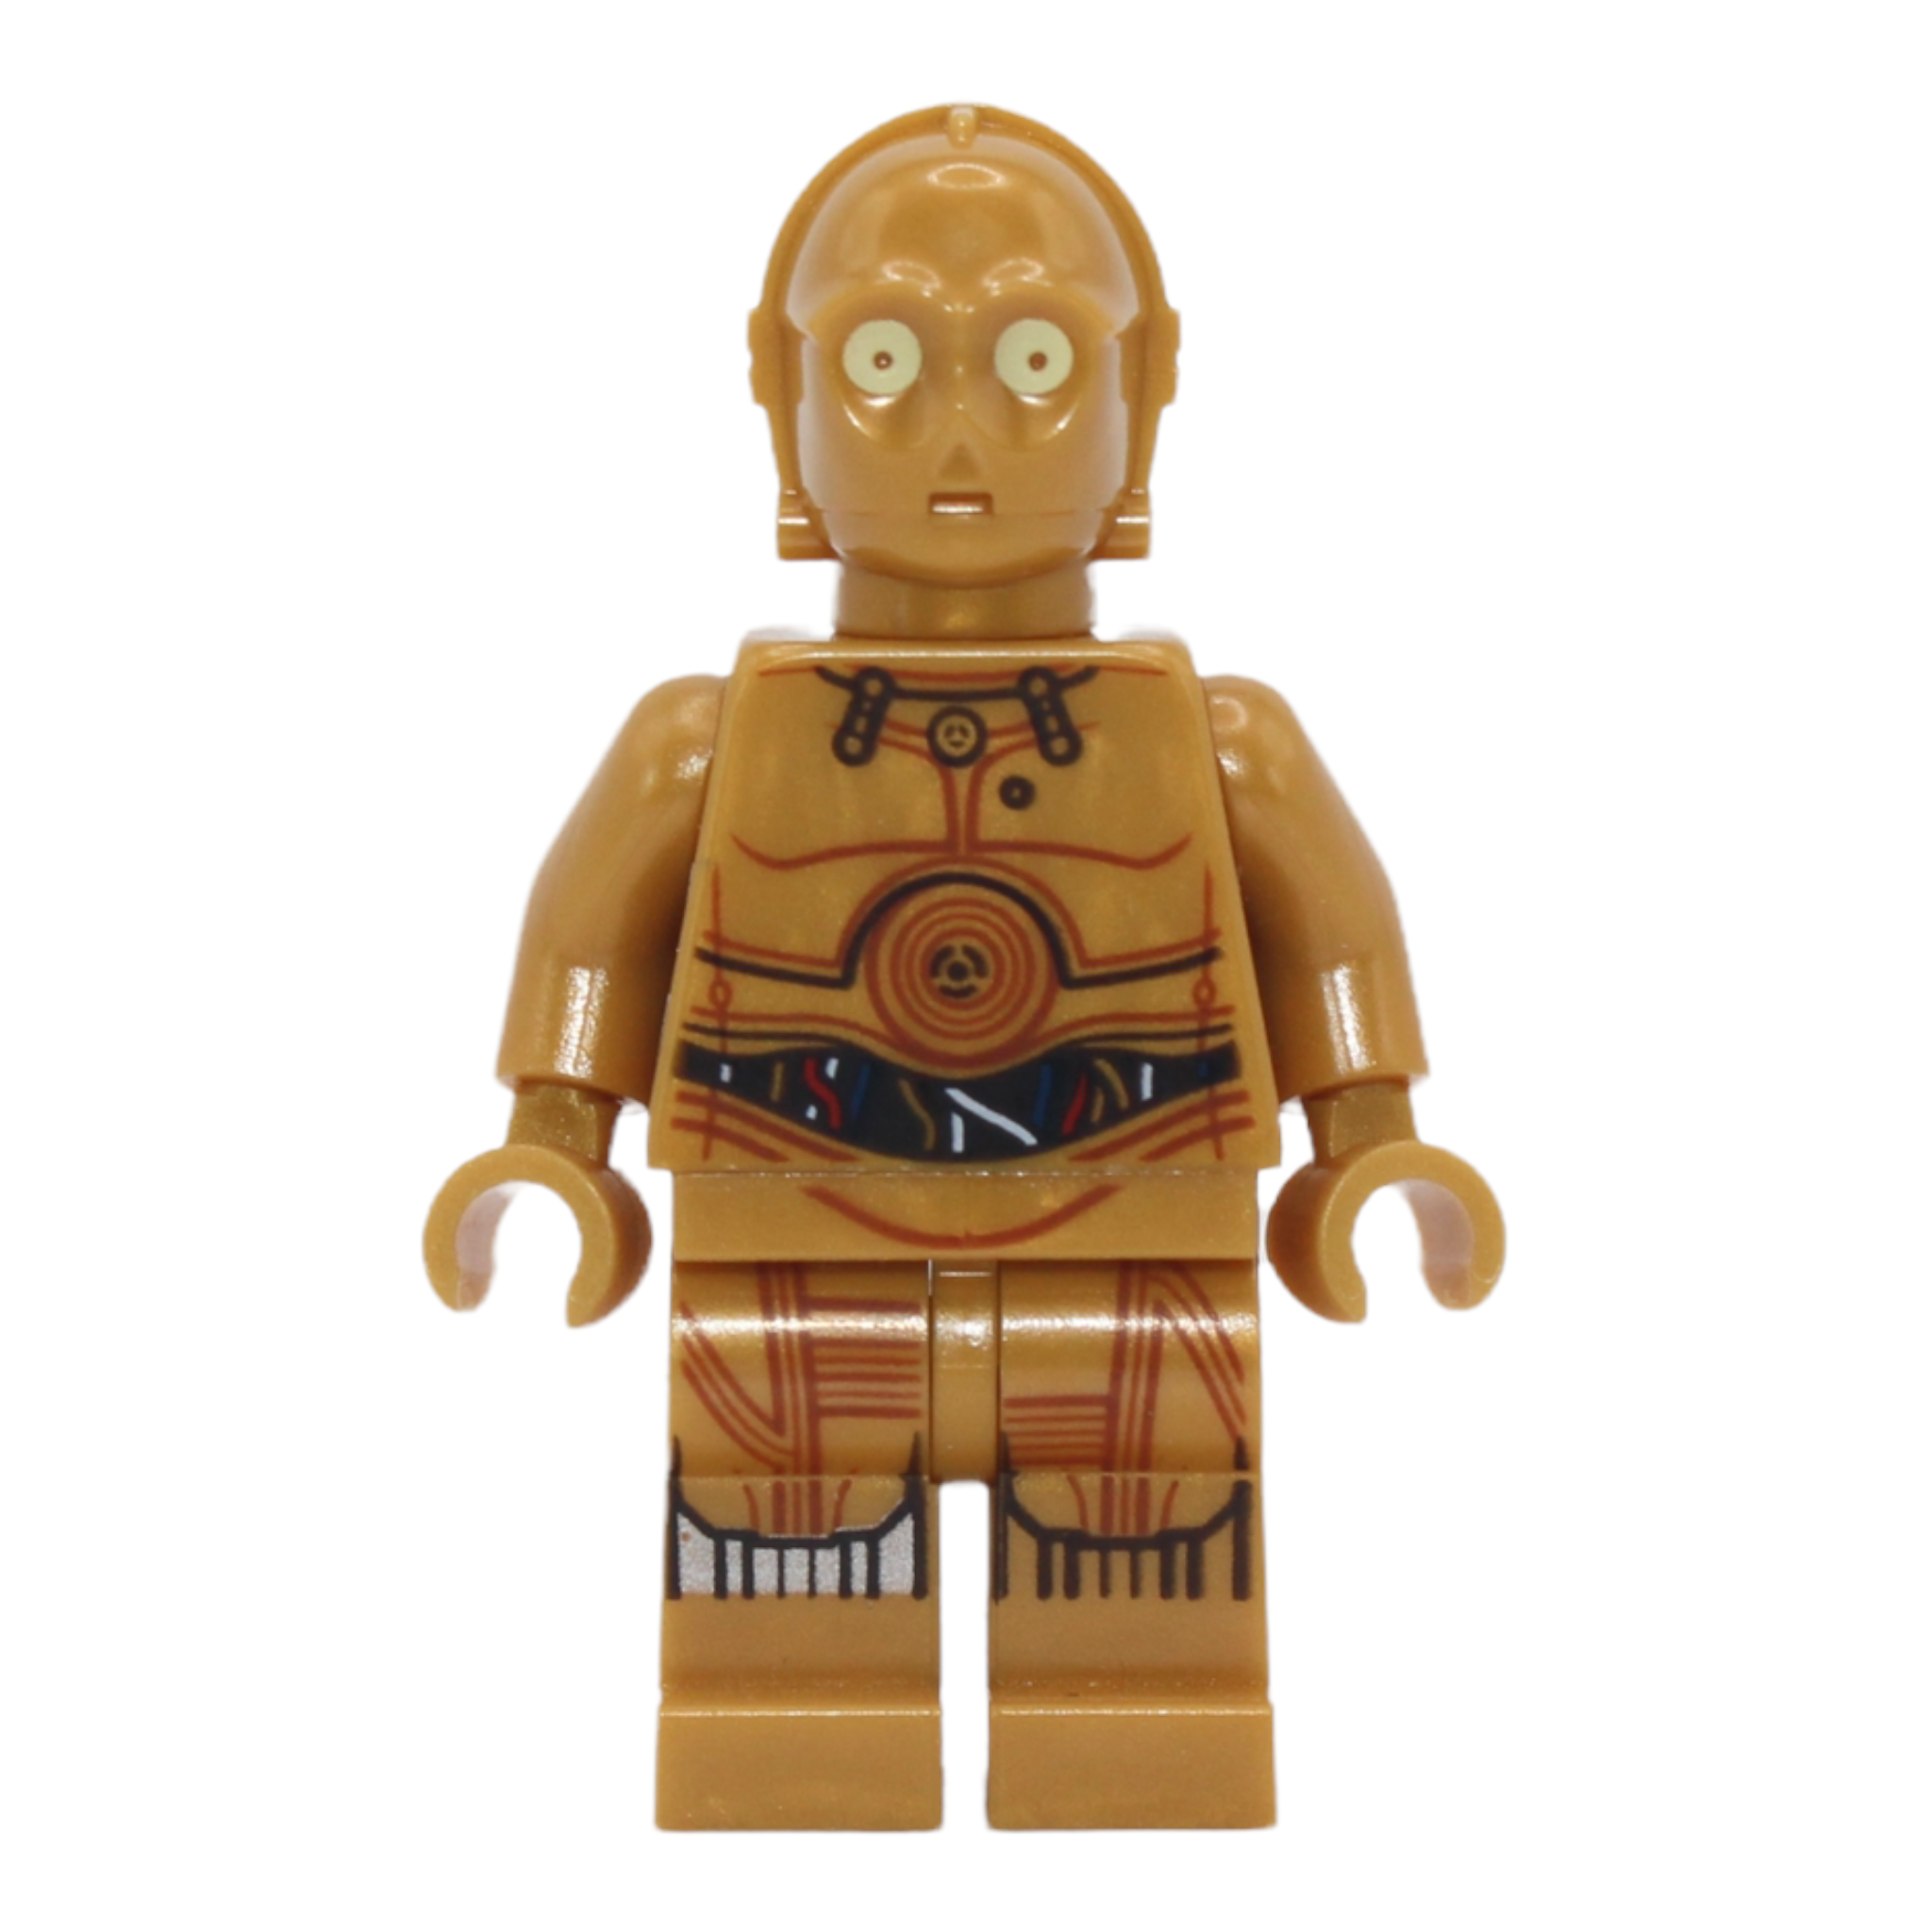 C-3PO (colorful wires, printed legs, 2016)